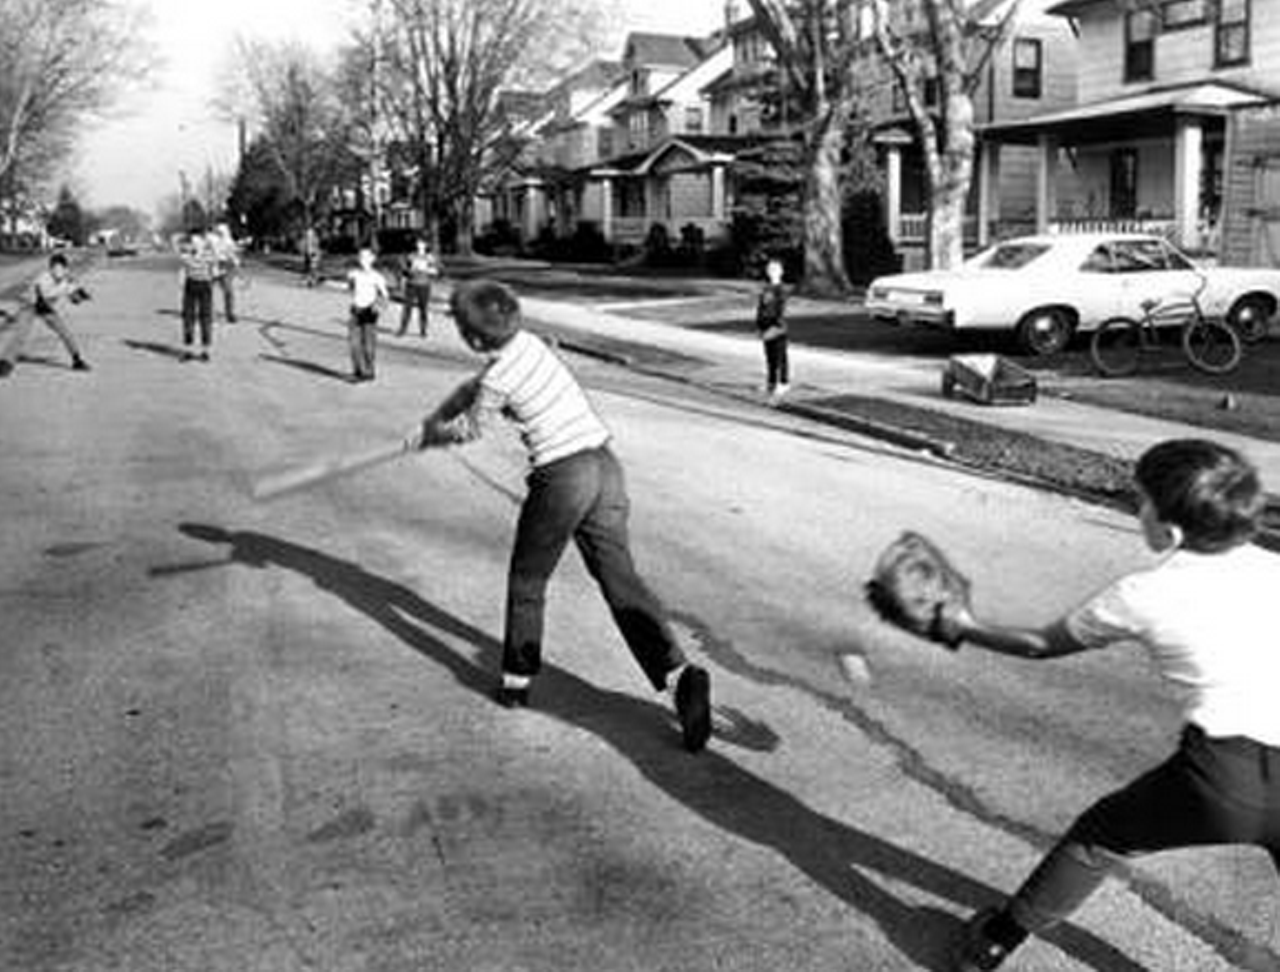 Playing a casual game of street ball, 1968.